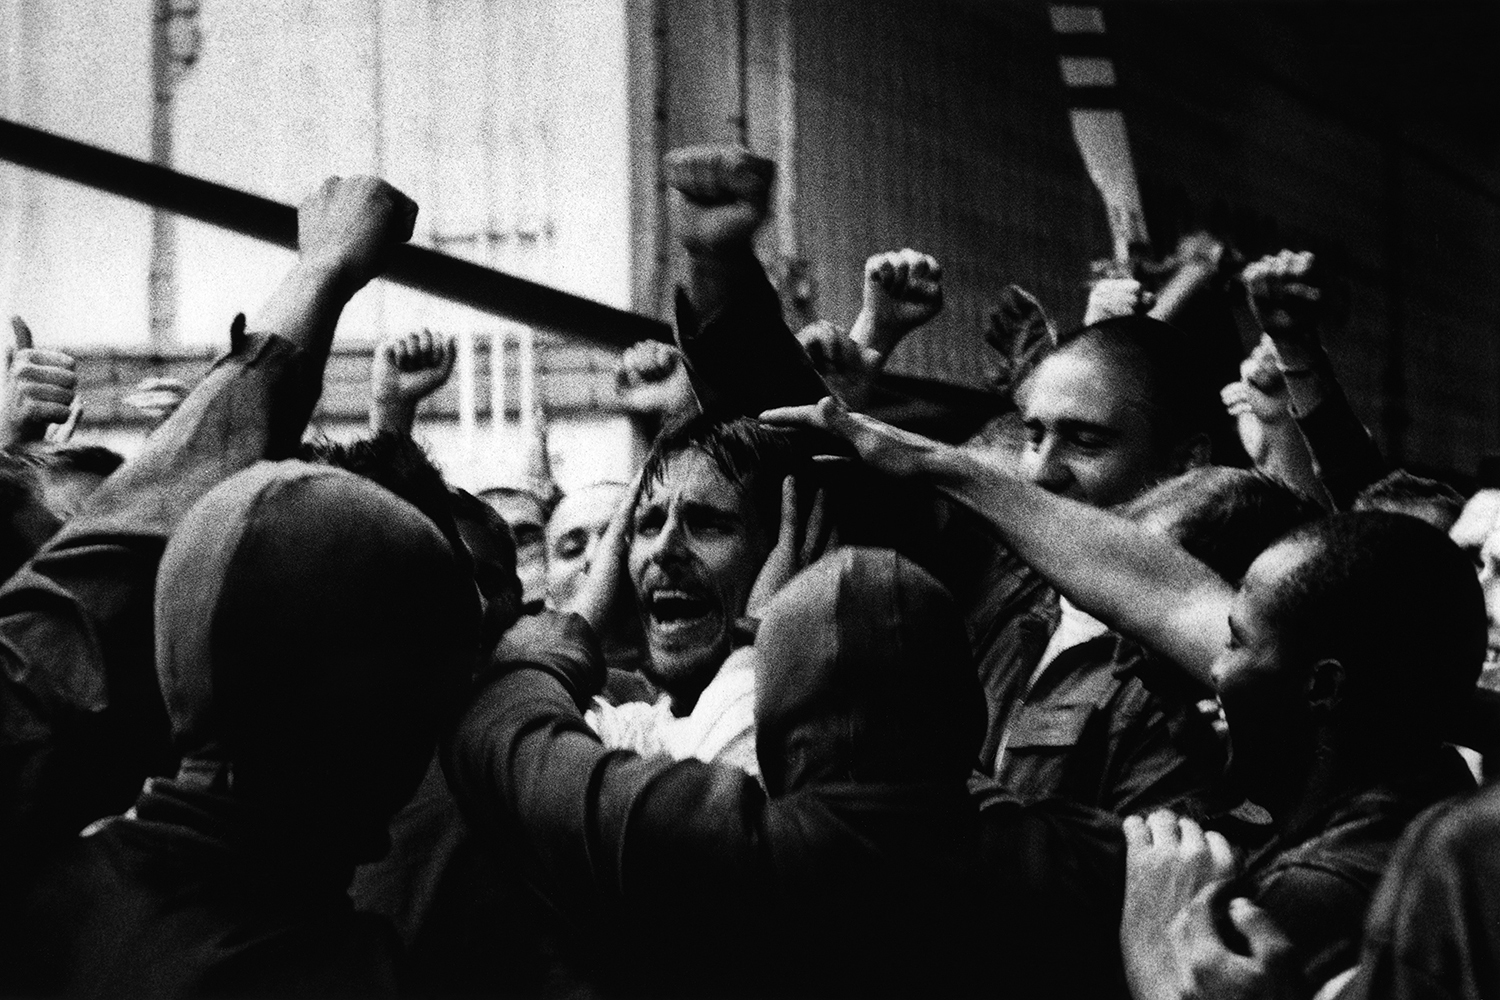 Black and white photo: A man is surrounded by many others. They seem to be cheering him on, grabbing him by the head.